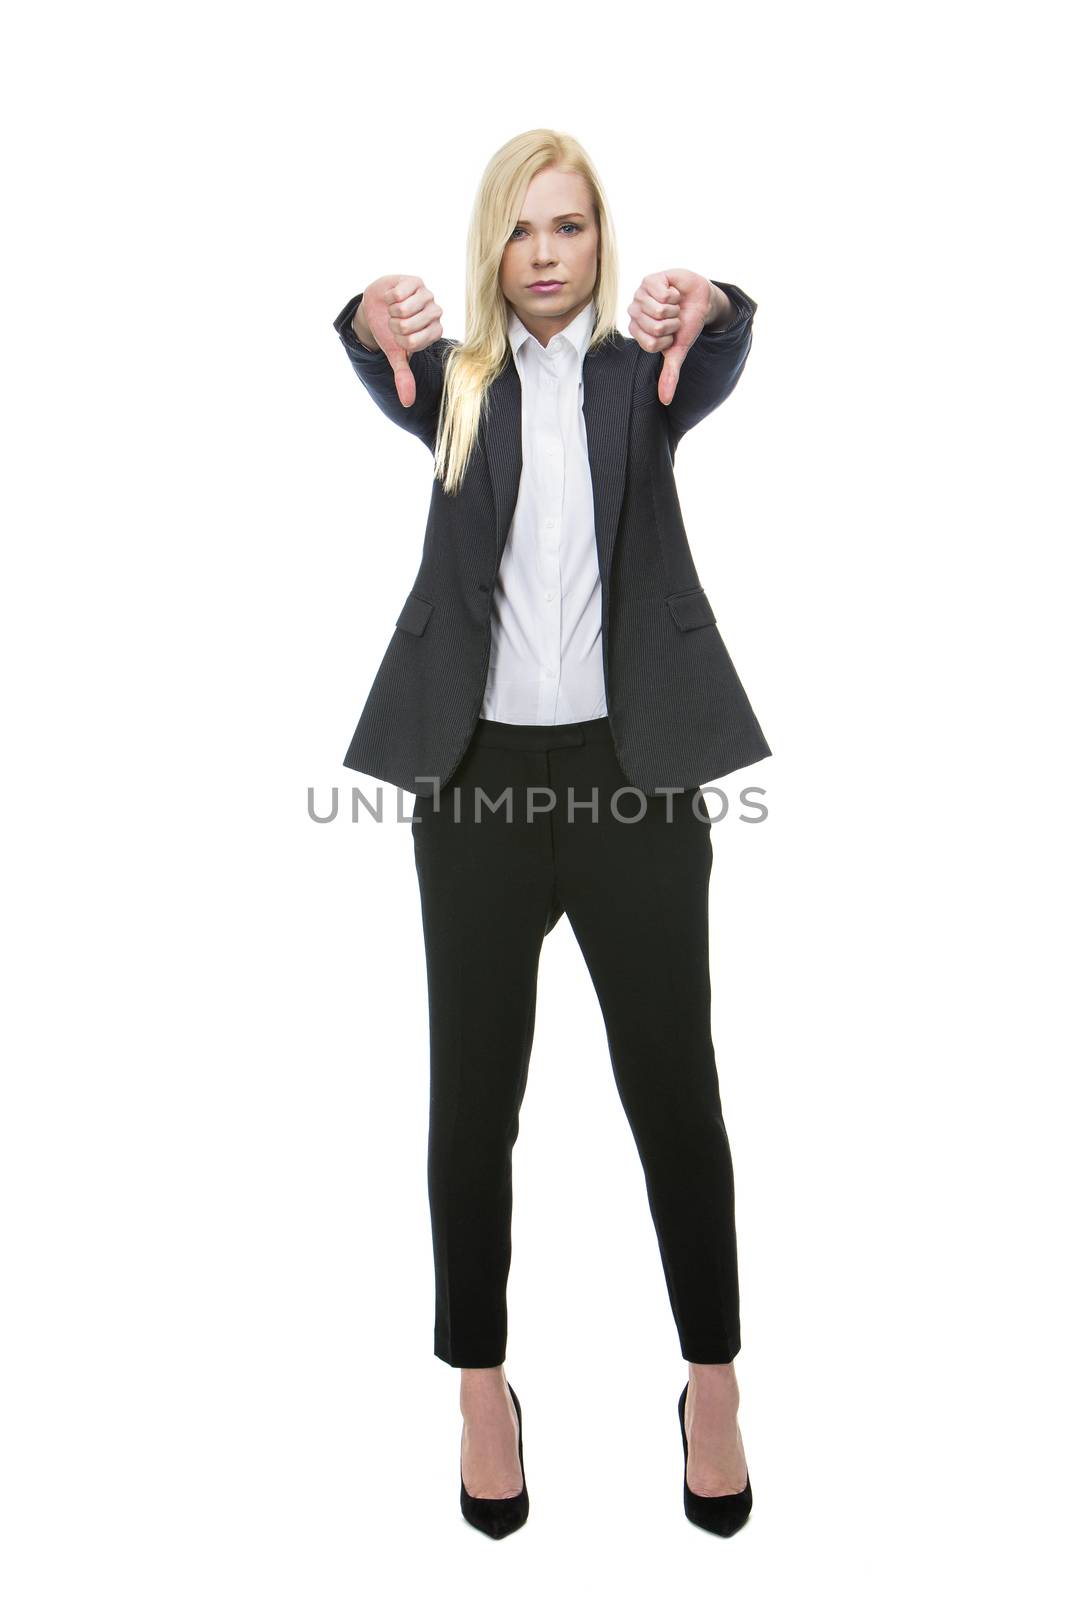 businesswoman thumbs down by Flareimage